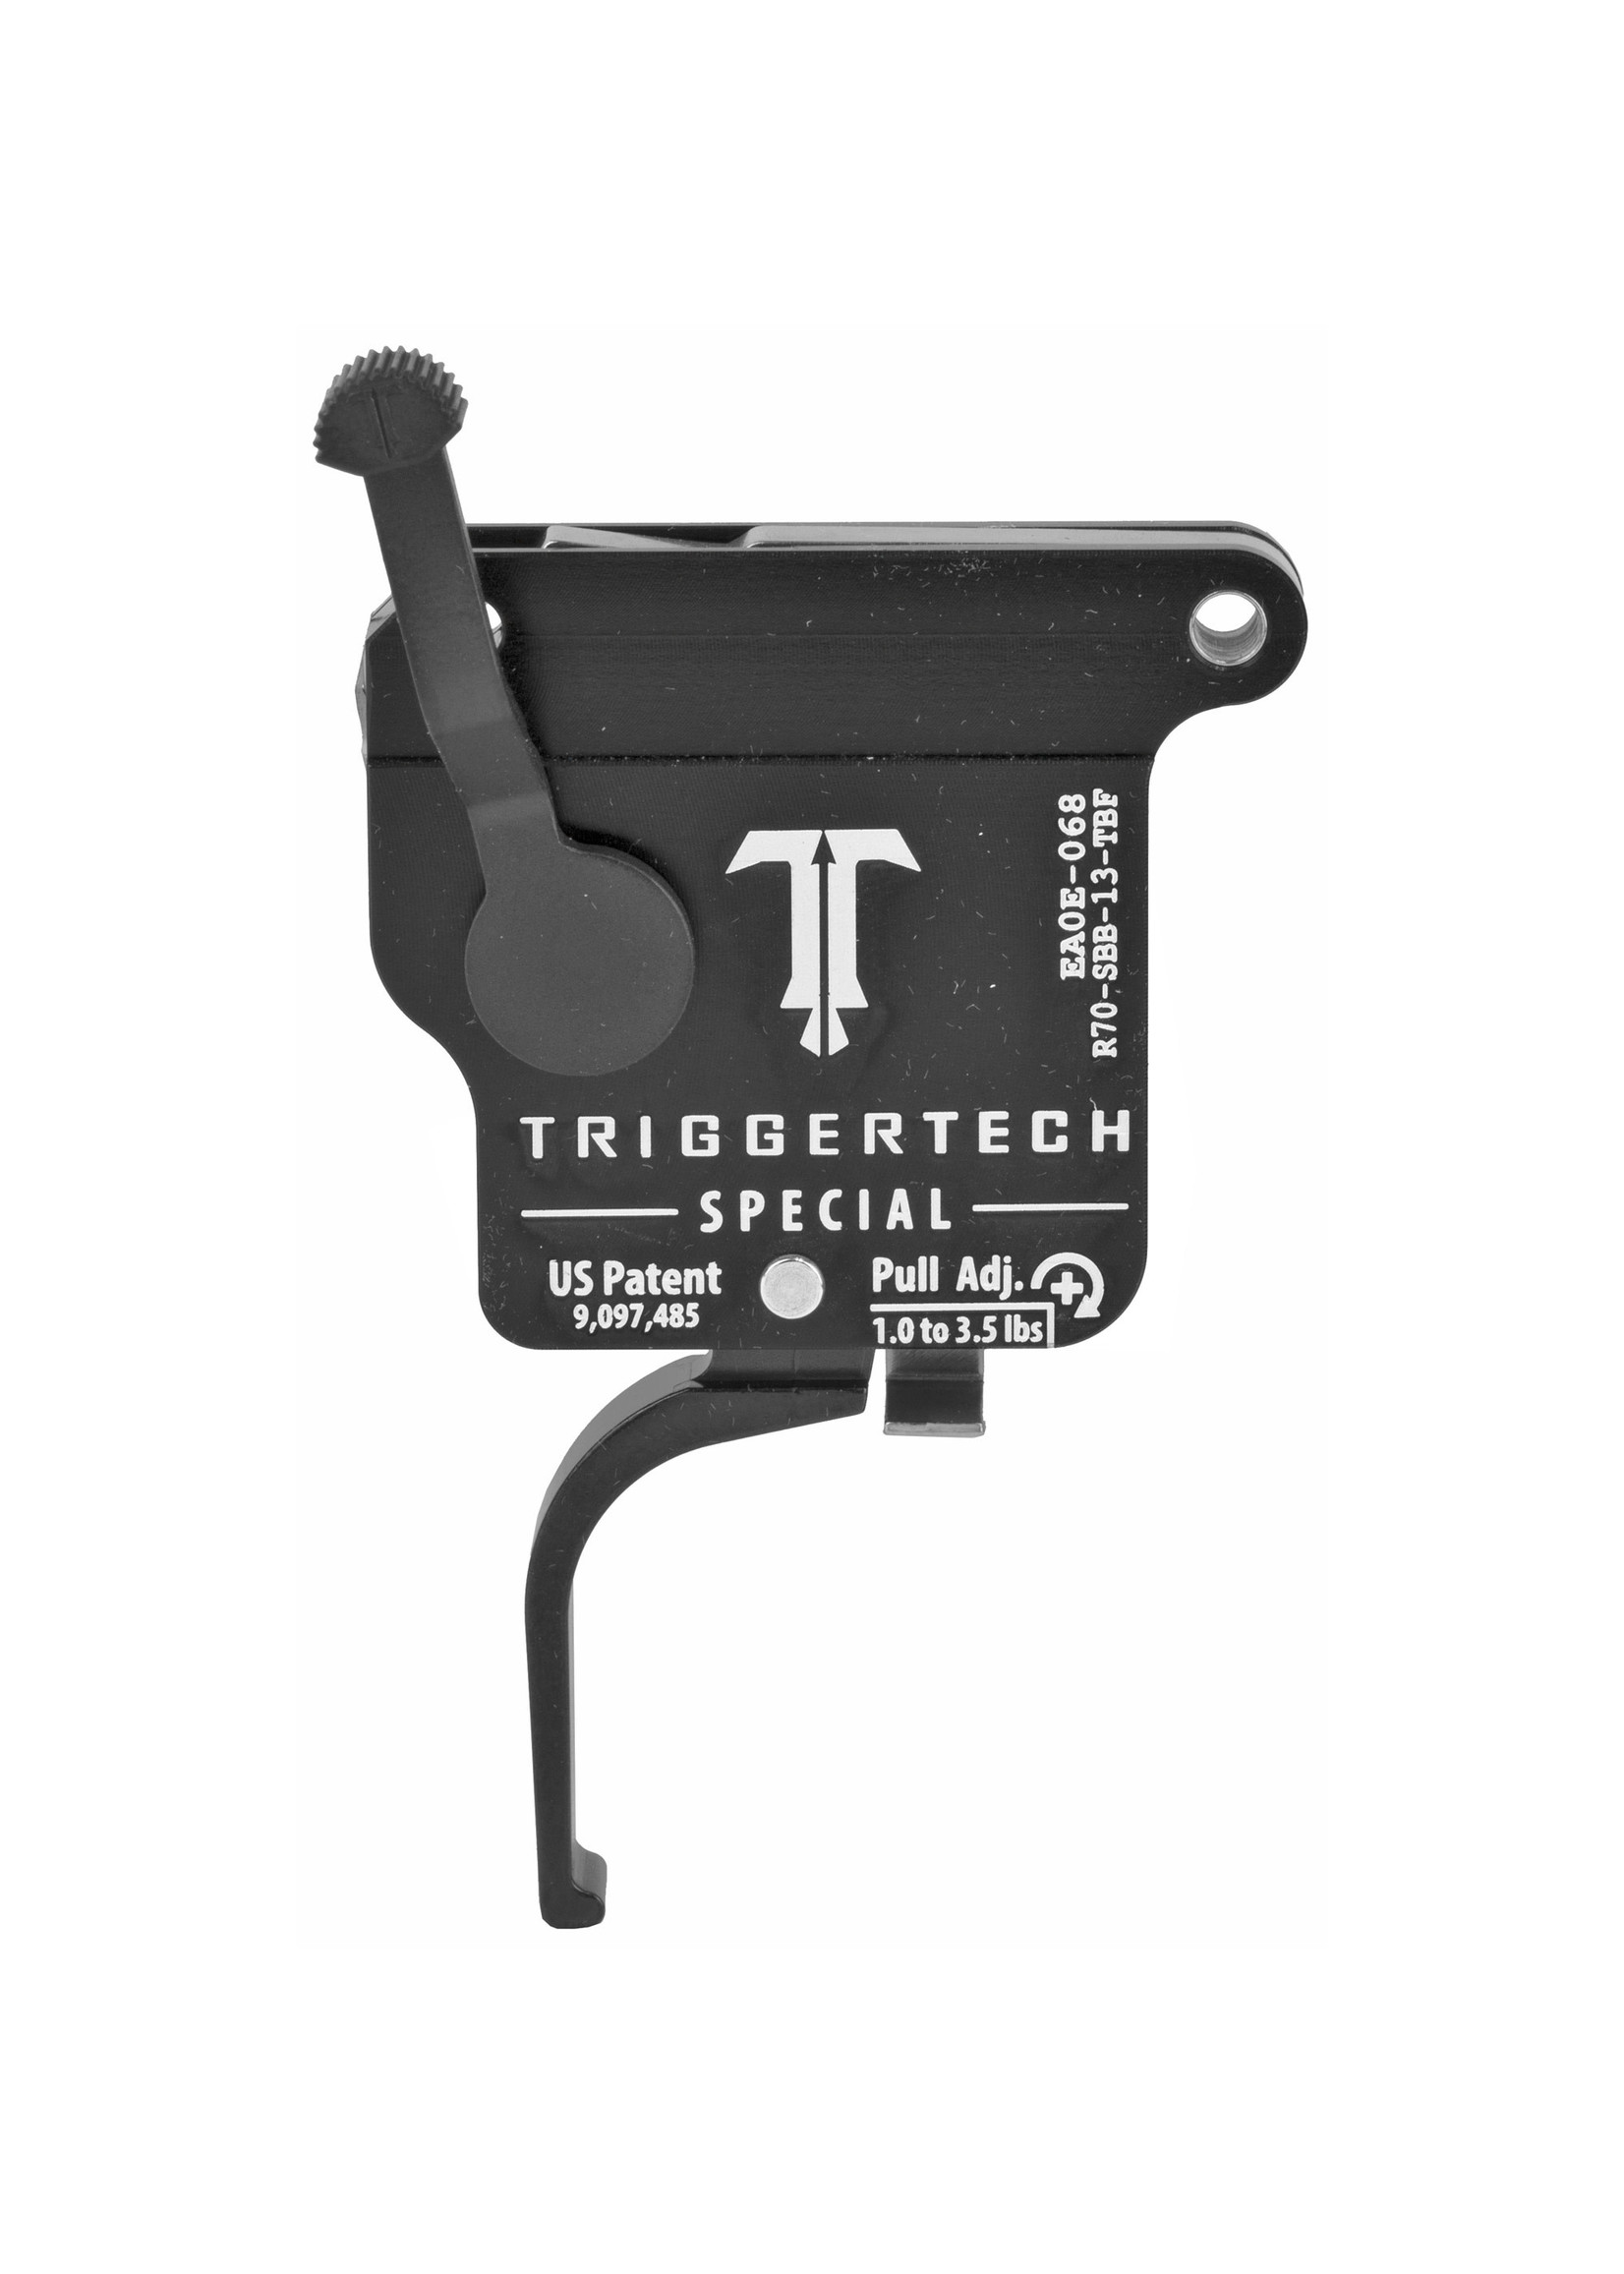 Trigger Tech TriggerTech, Trigger, 1.0-3.5LB Pull Weight, Fits Remington 700, Special Flat Trigger, Bolt Release Model, Right Hand, Adjustable, Black Finish, Includes Installation Tools, Instruction Book, & TriggerTech Patch